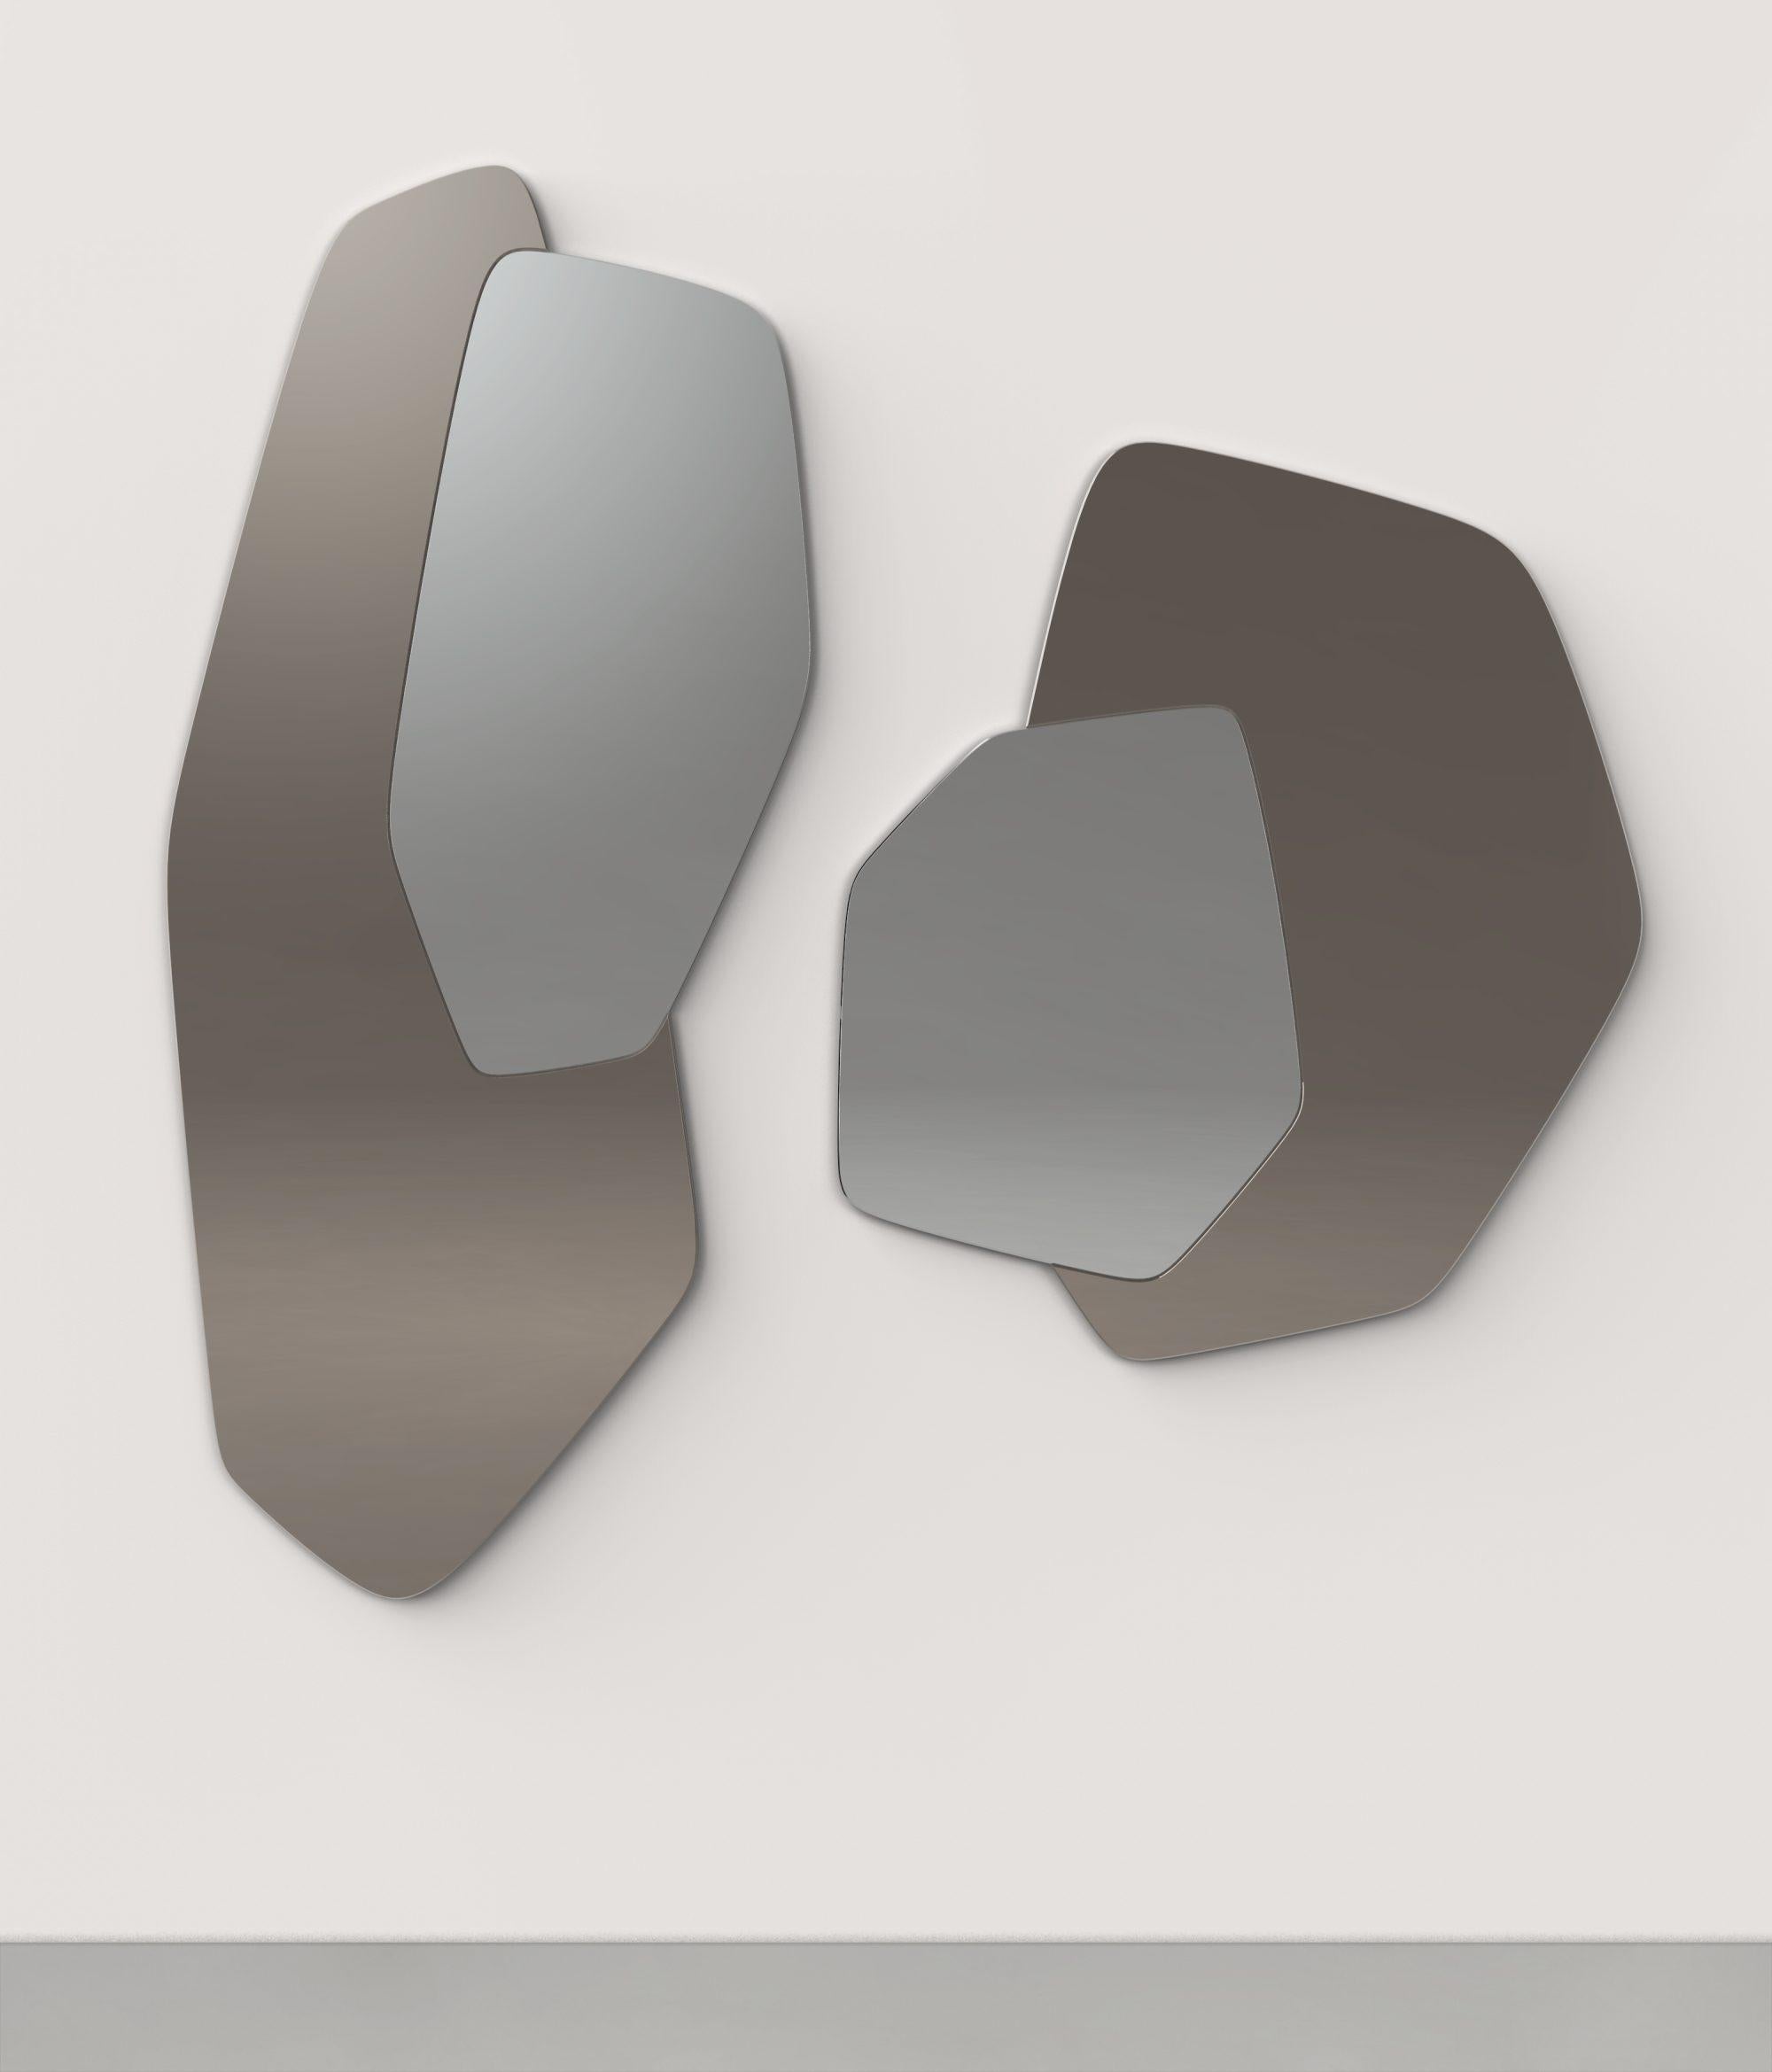 Set of 2 Nori V1 and V2 Wall Mirrors by Edizione Limitata
Limited Edition of 1000 pieces. Signed and numbered.
Dimensions: Nori V1: D 4 x W 56 x H 124 cm.
Nori V2: D 4 x W 70 x H 80 cm.
Materials: Bronzed and silvered mirror.

Nori is a collection